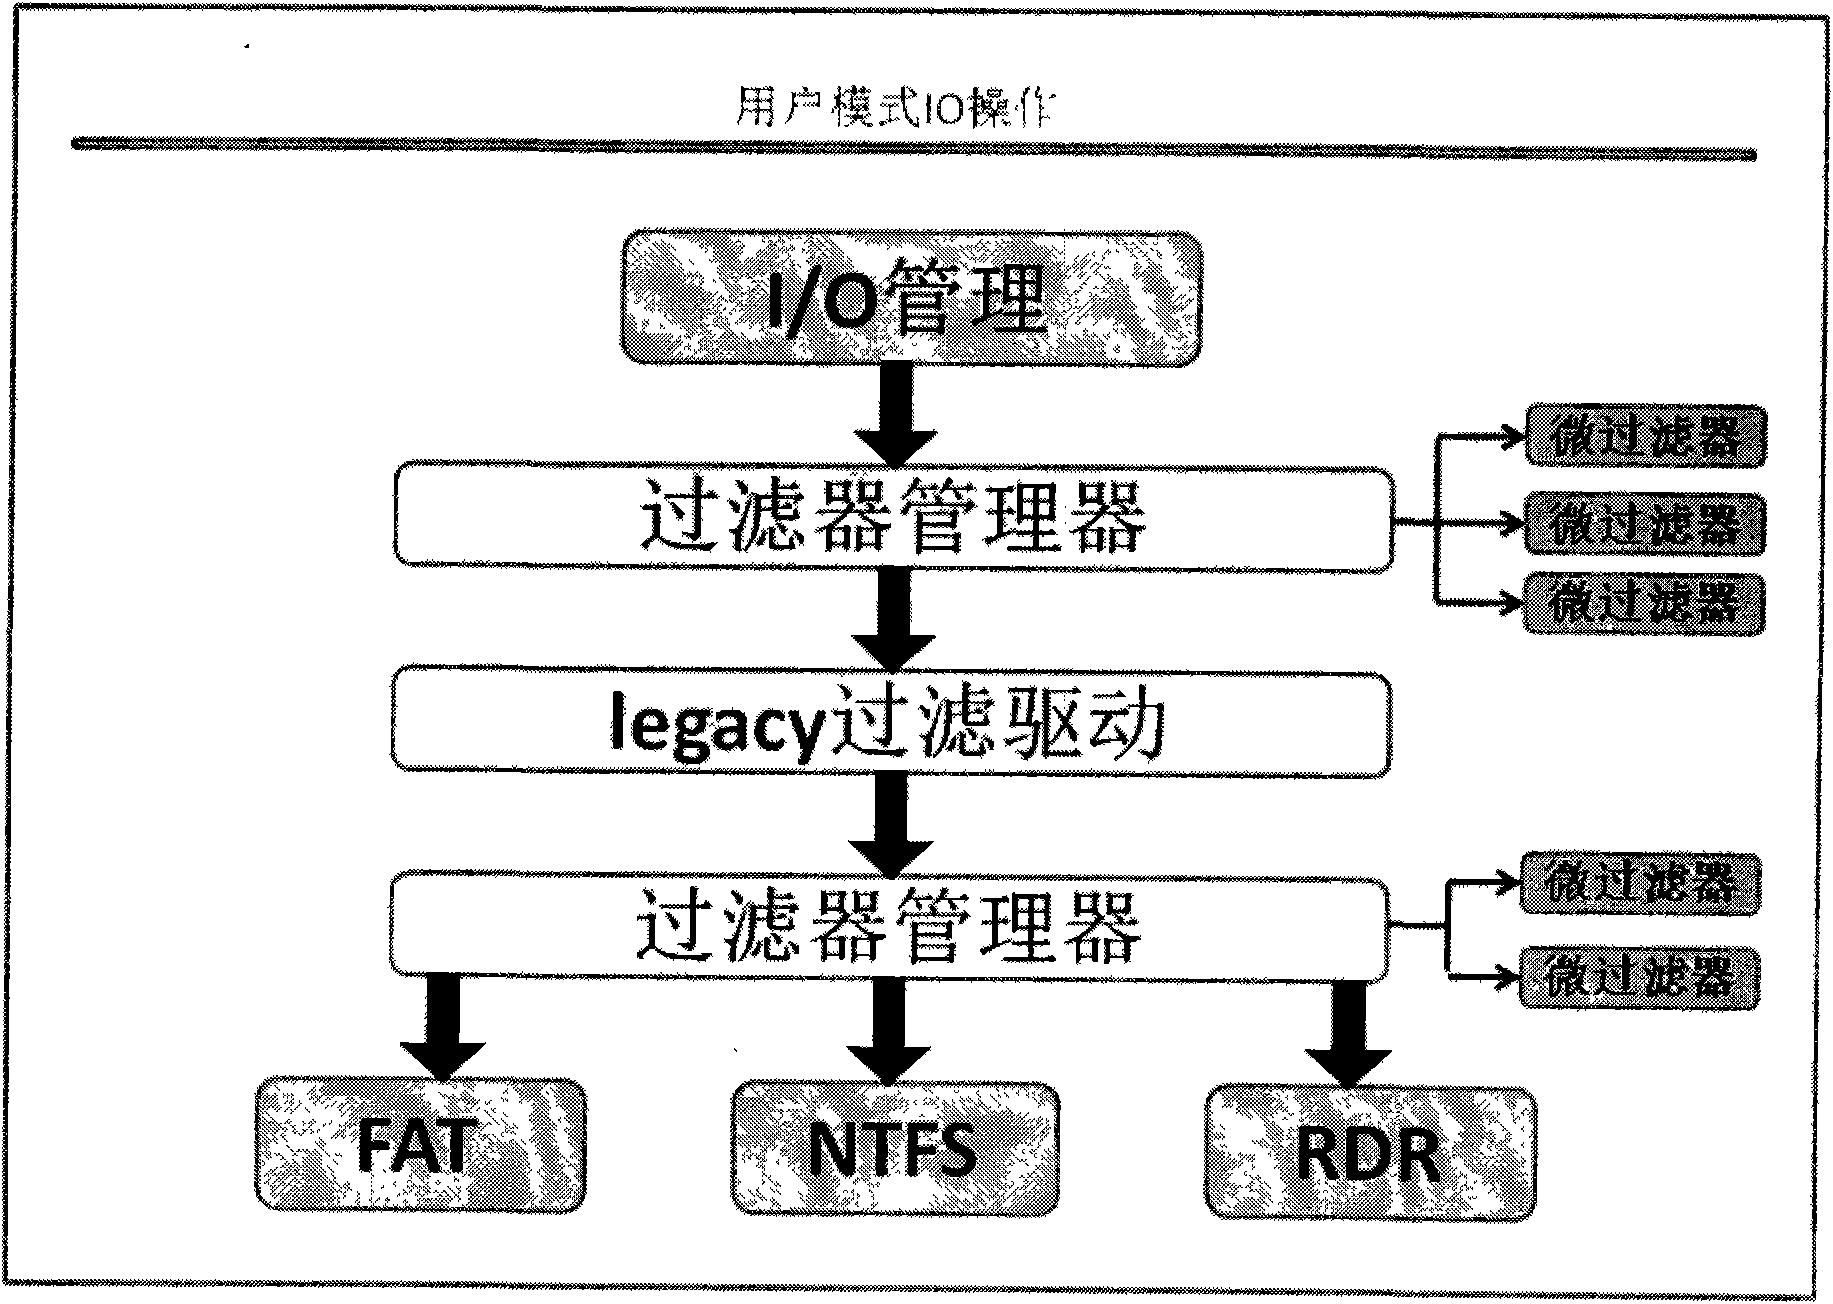 File access control method based on filter driving, system and filer manager